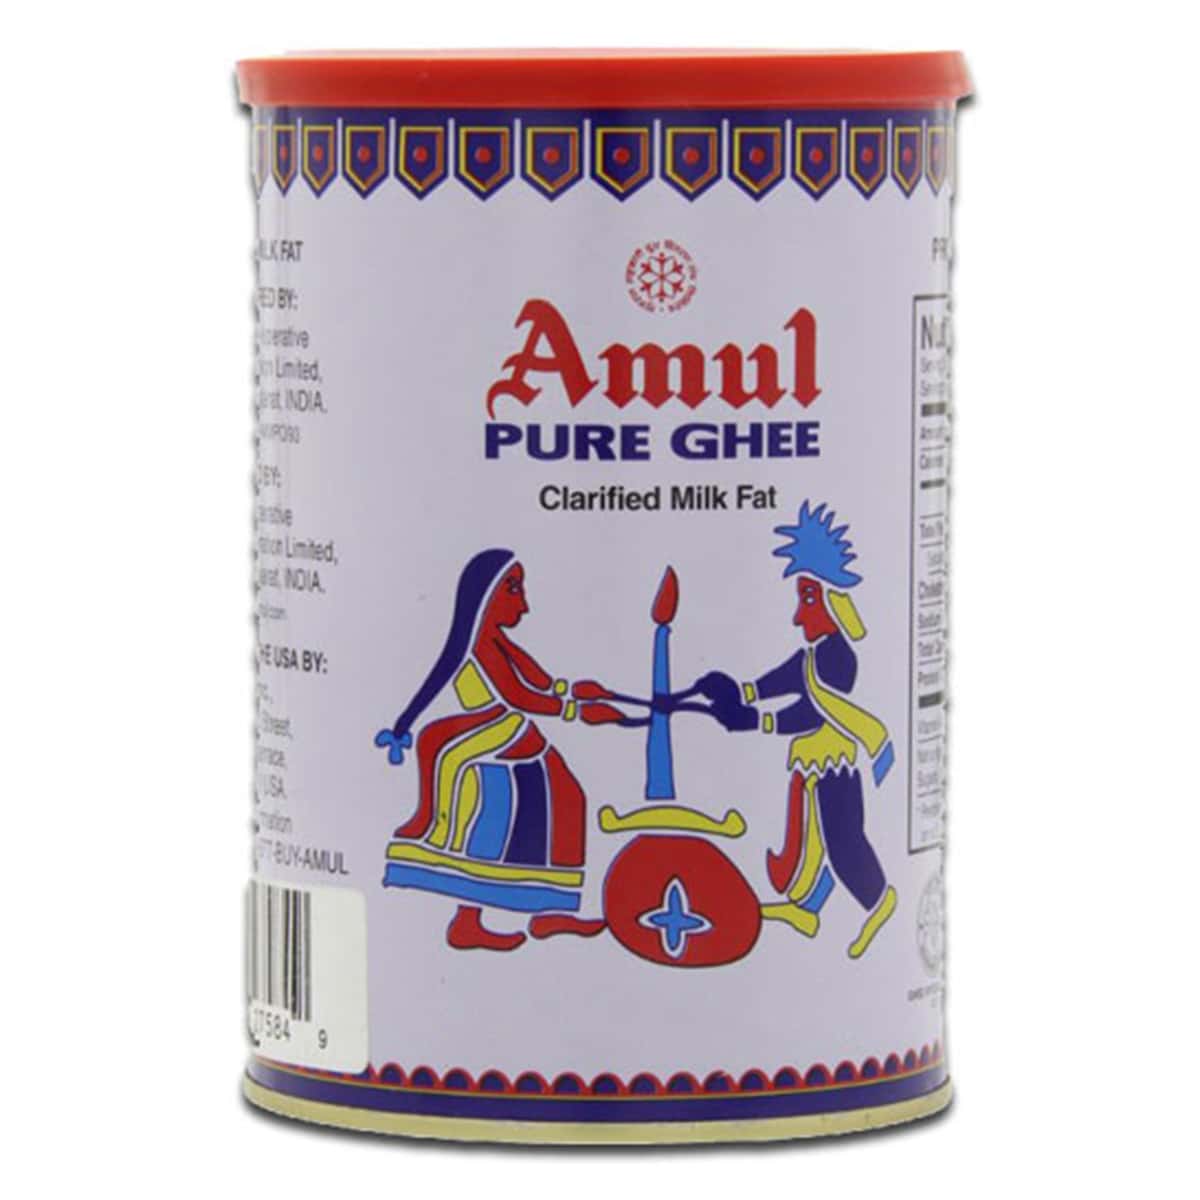 Buy Amul Pure Ghee (Clarified Butter) in Tin - 1 Litre